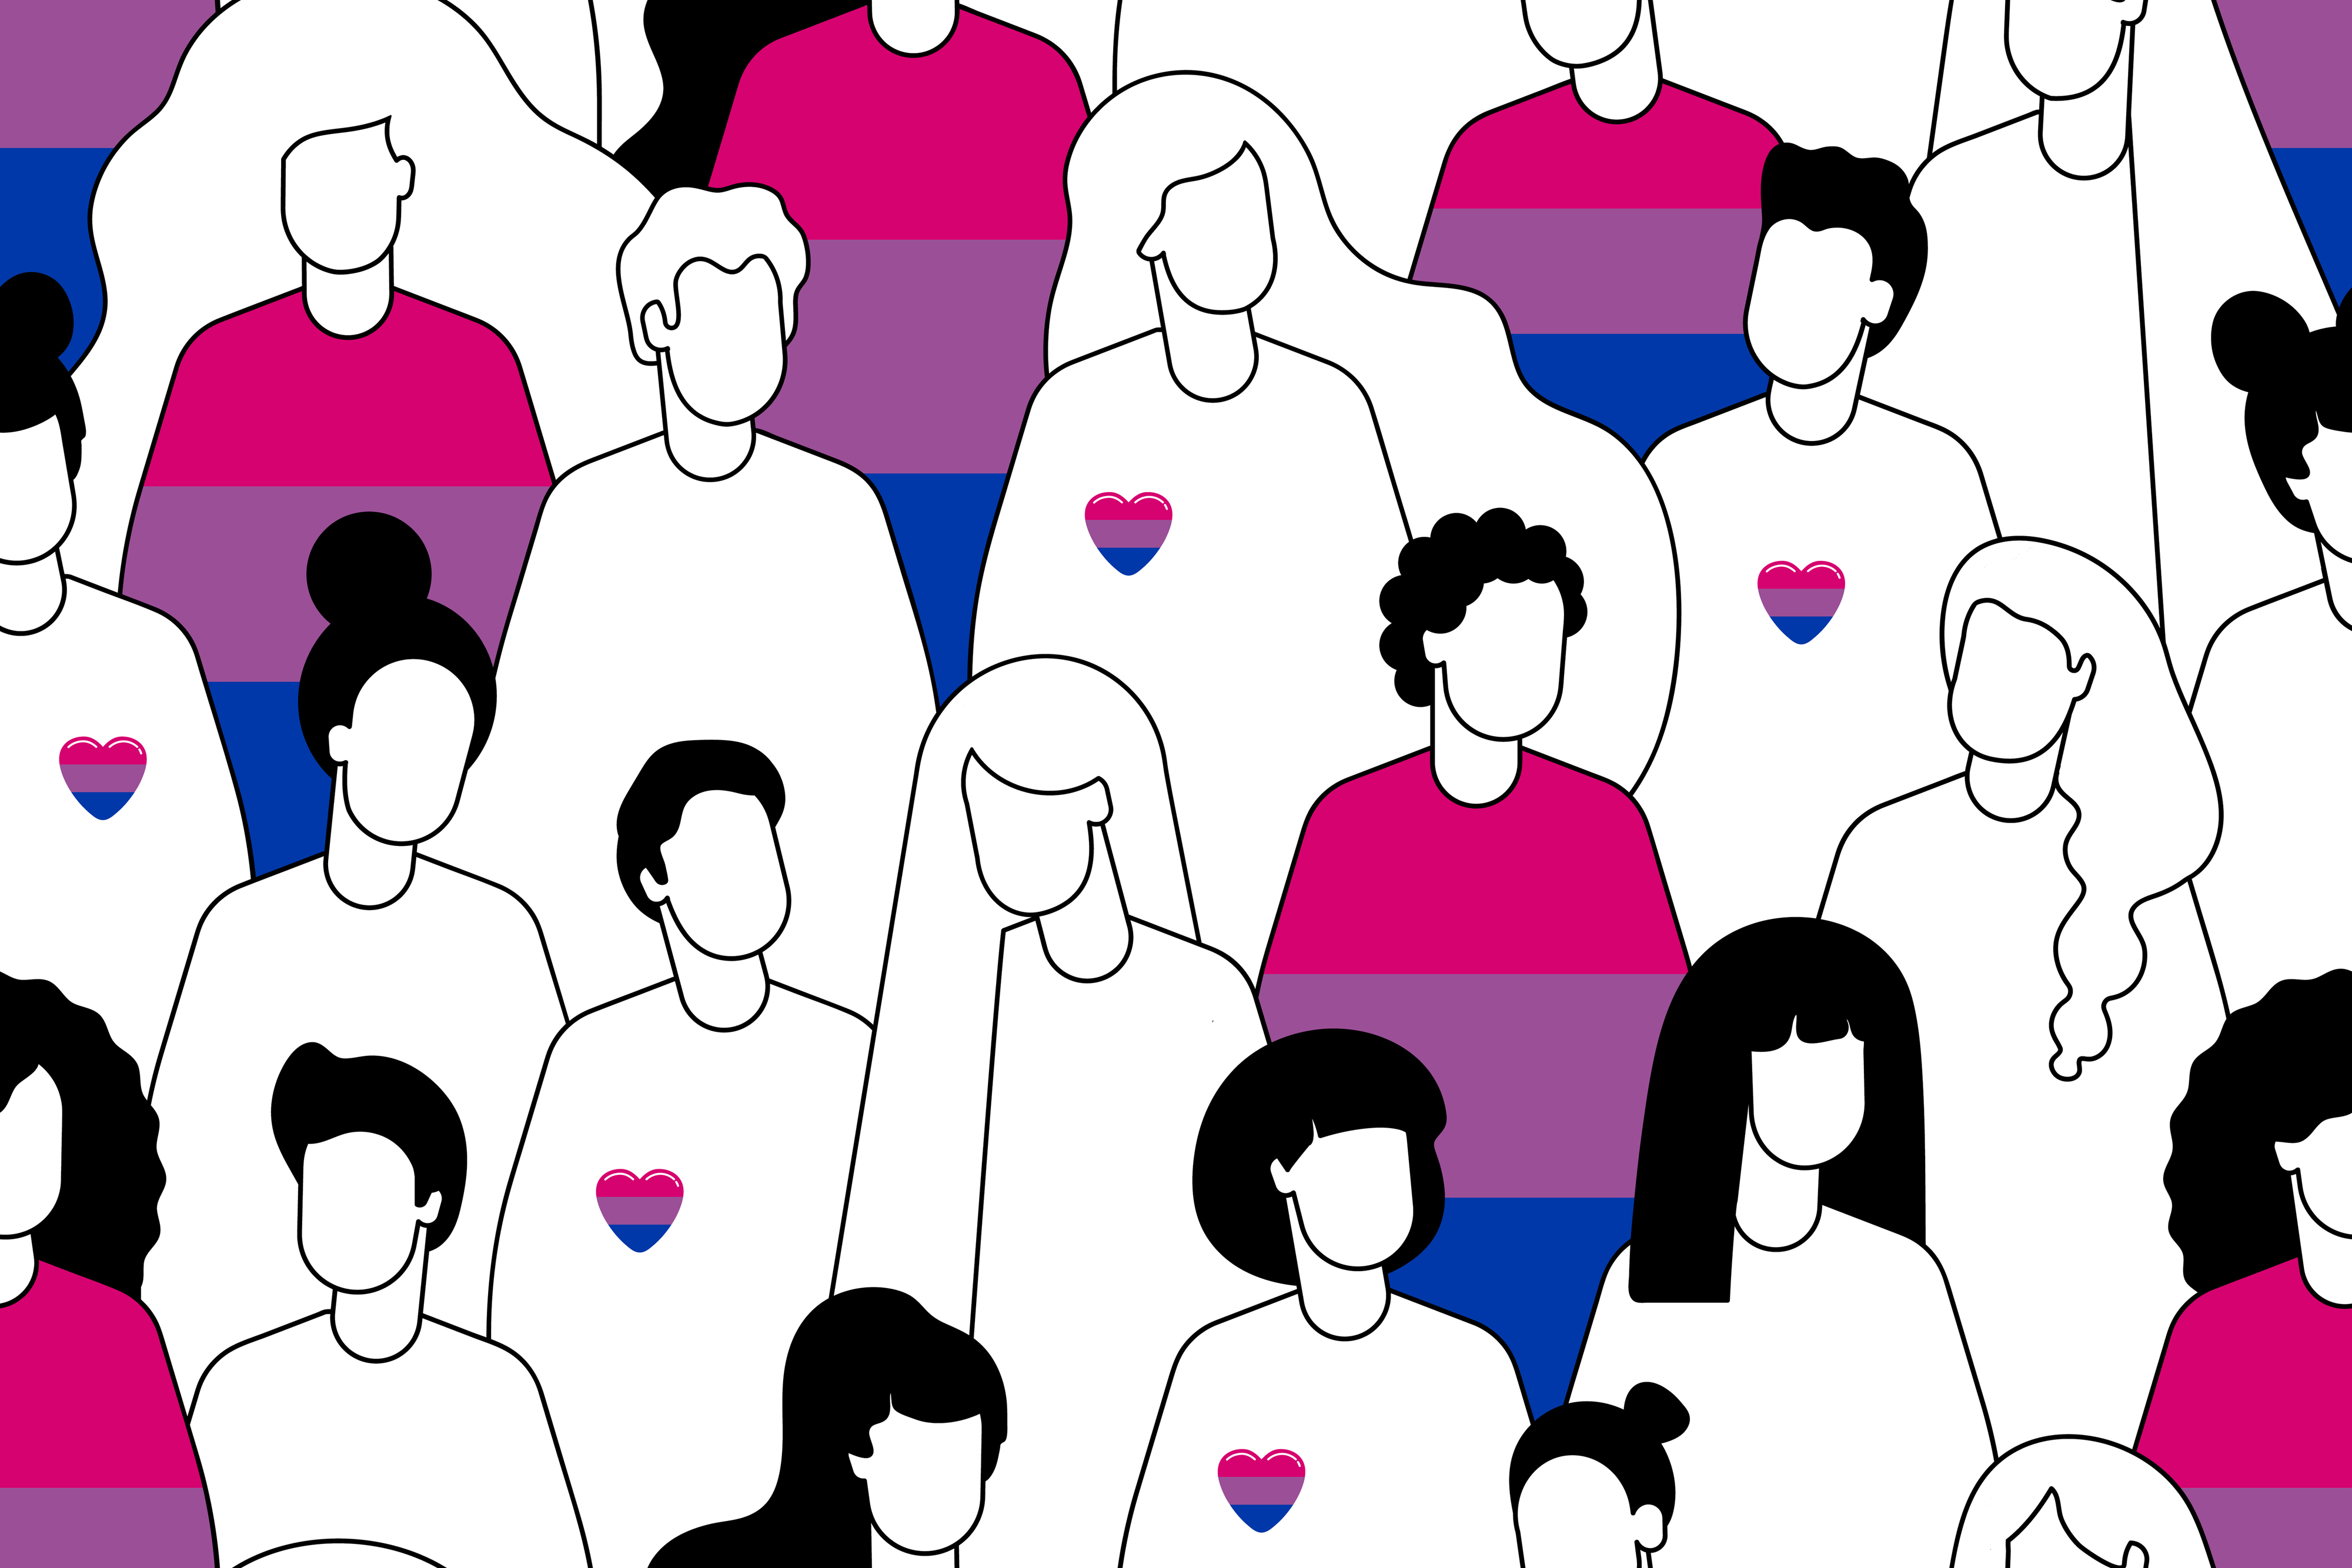 An illustration of diverse people with heart symbols on their shirts, representing LGBTQ+ community solidarity